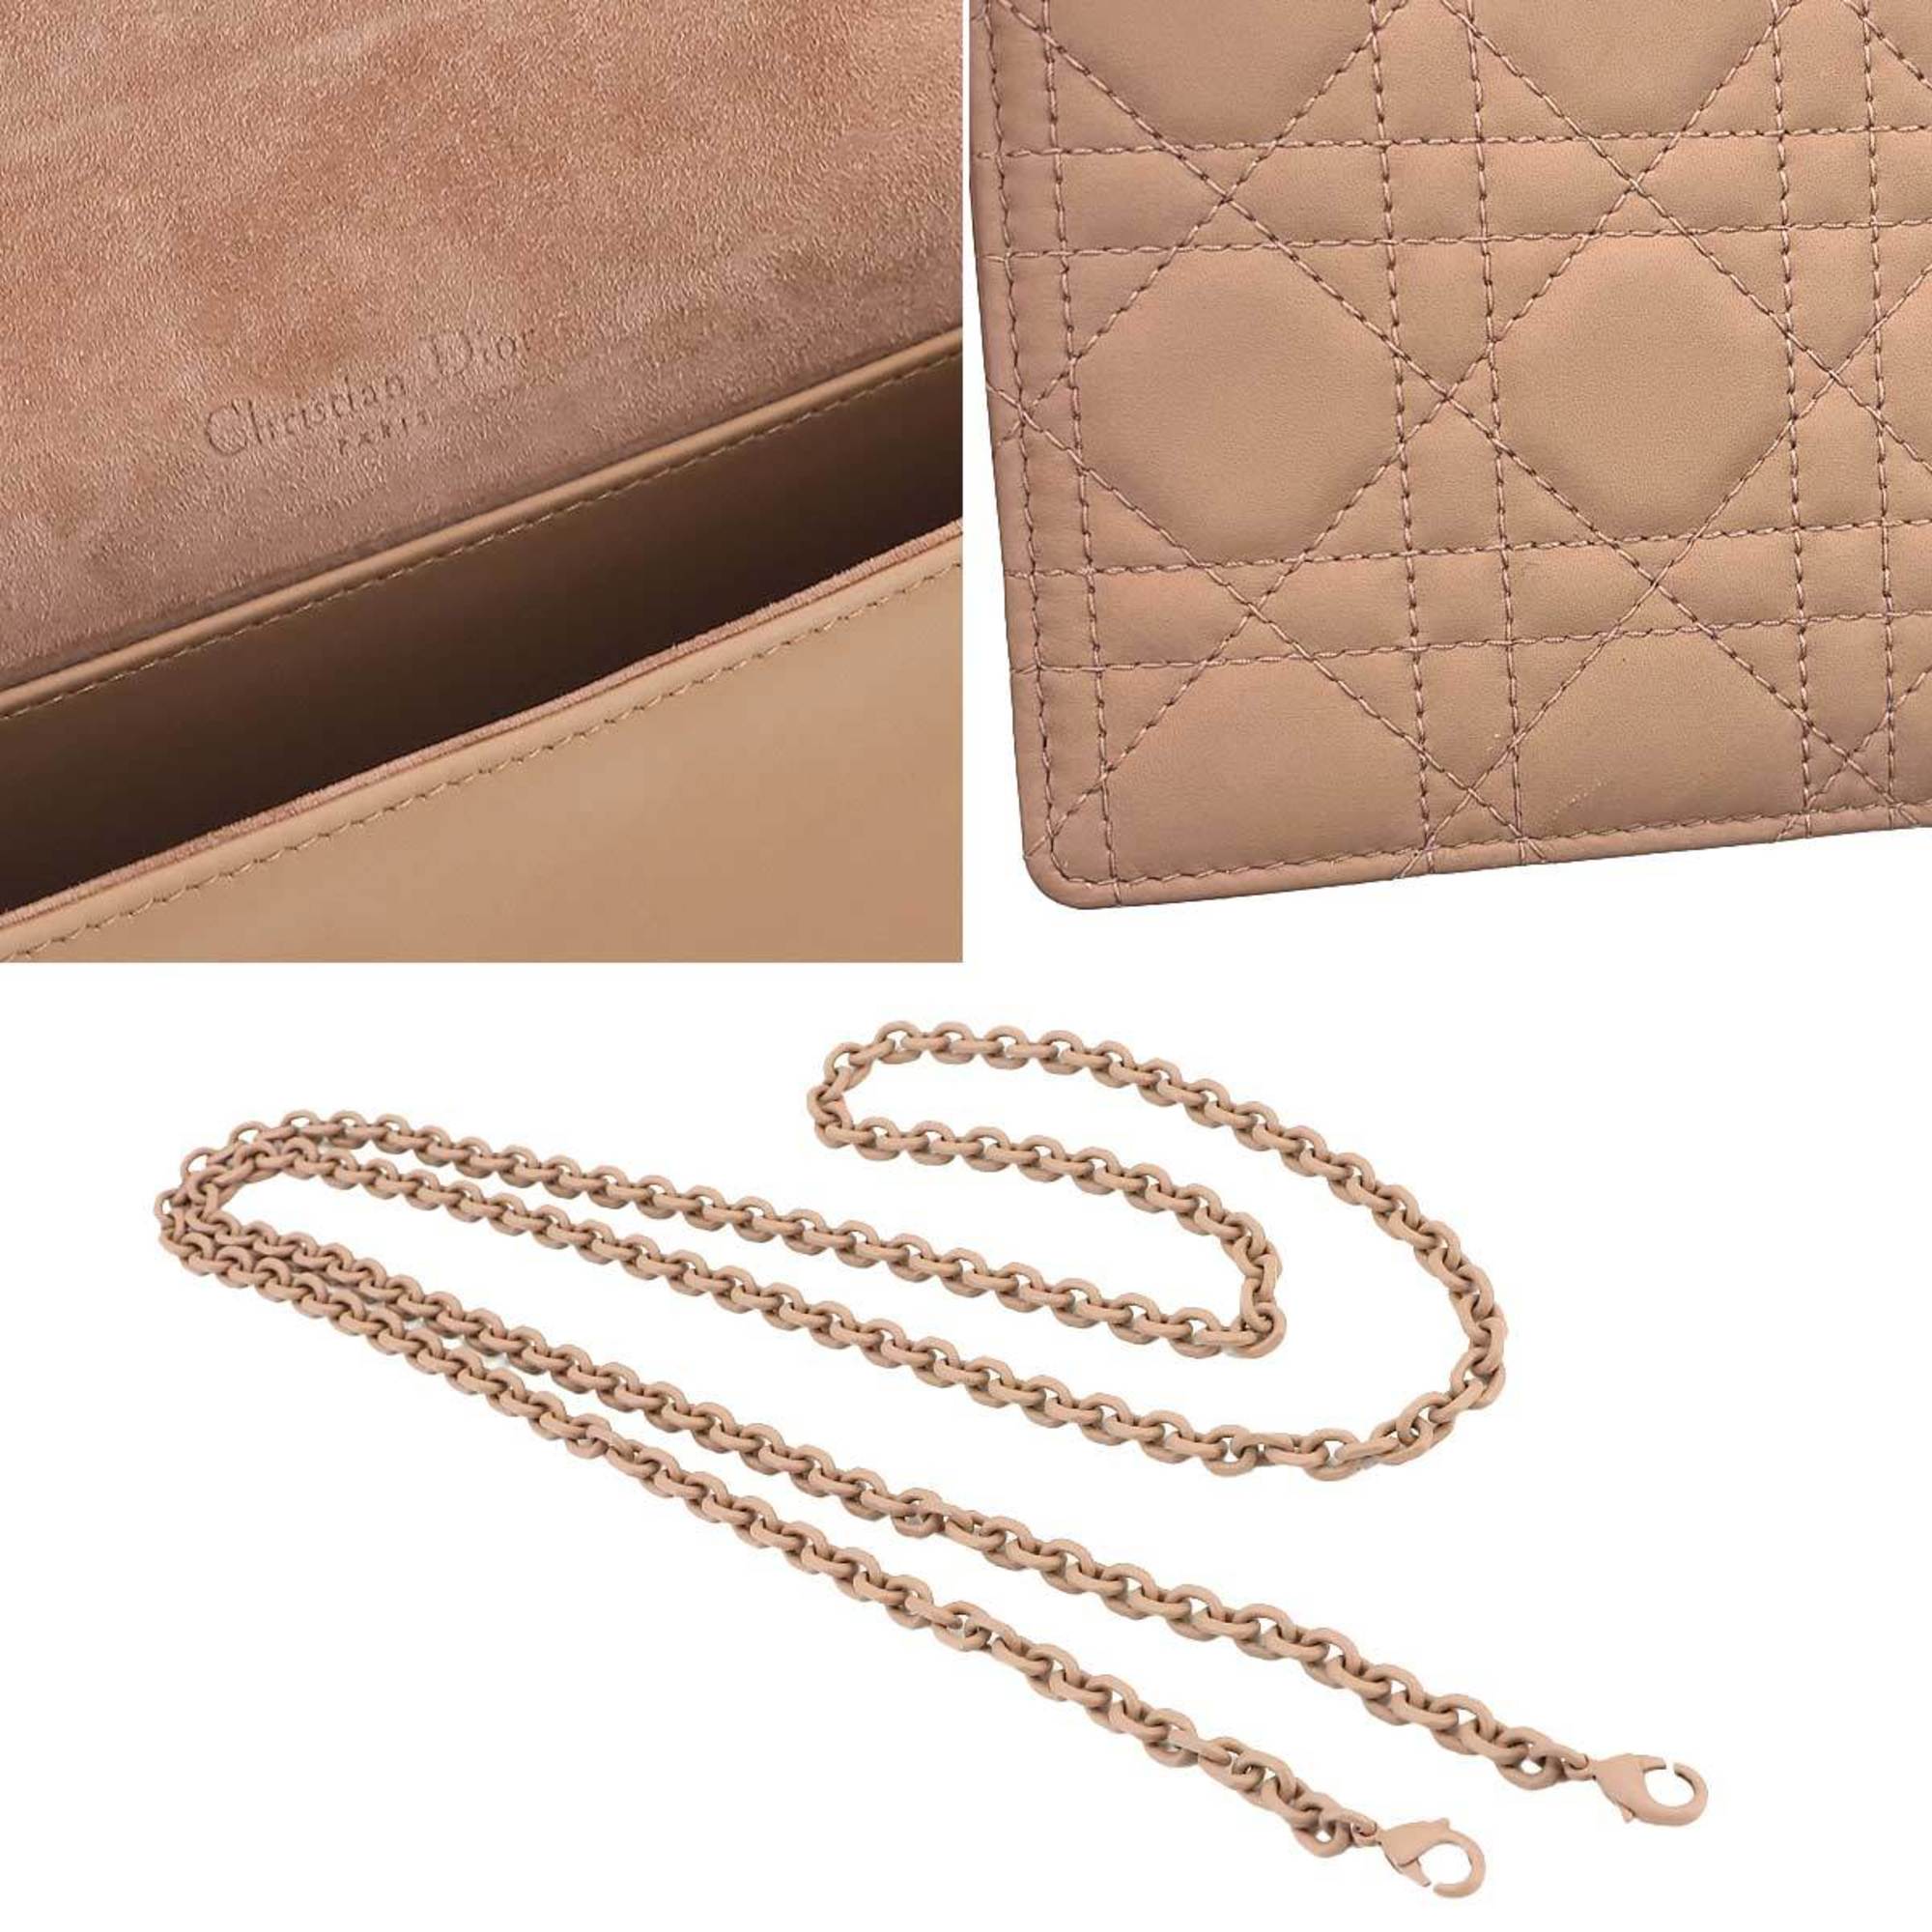 Christian Dior Lady Pouch Chain Wallet Bi-fold Long Leather Beige S0204SO1